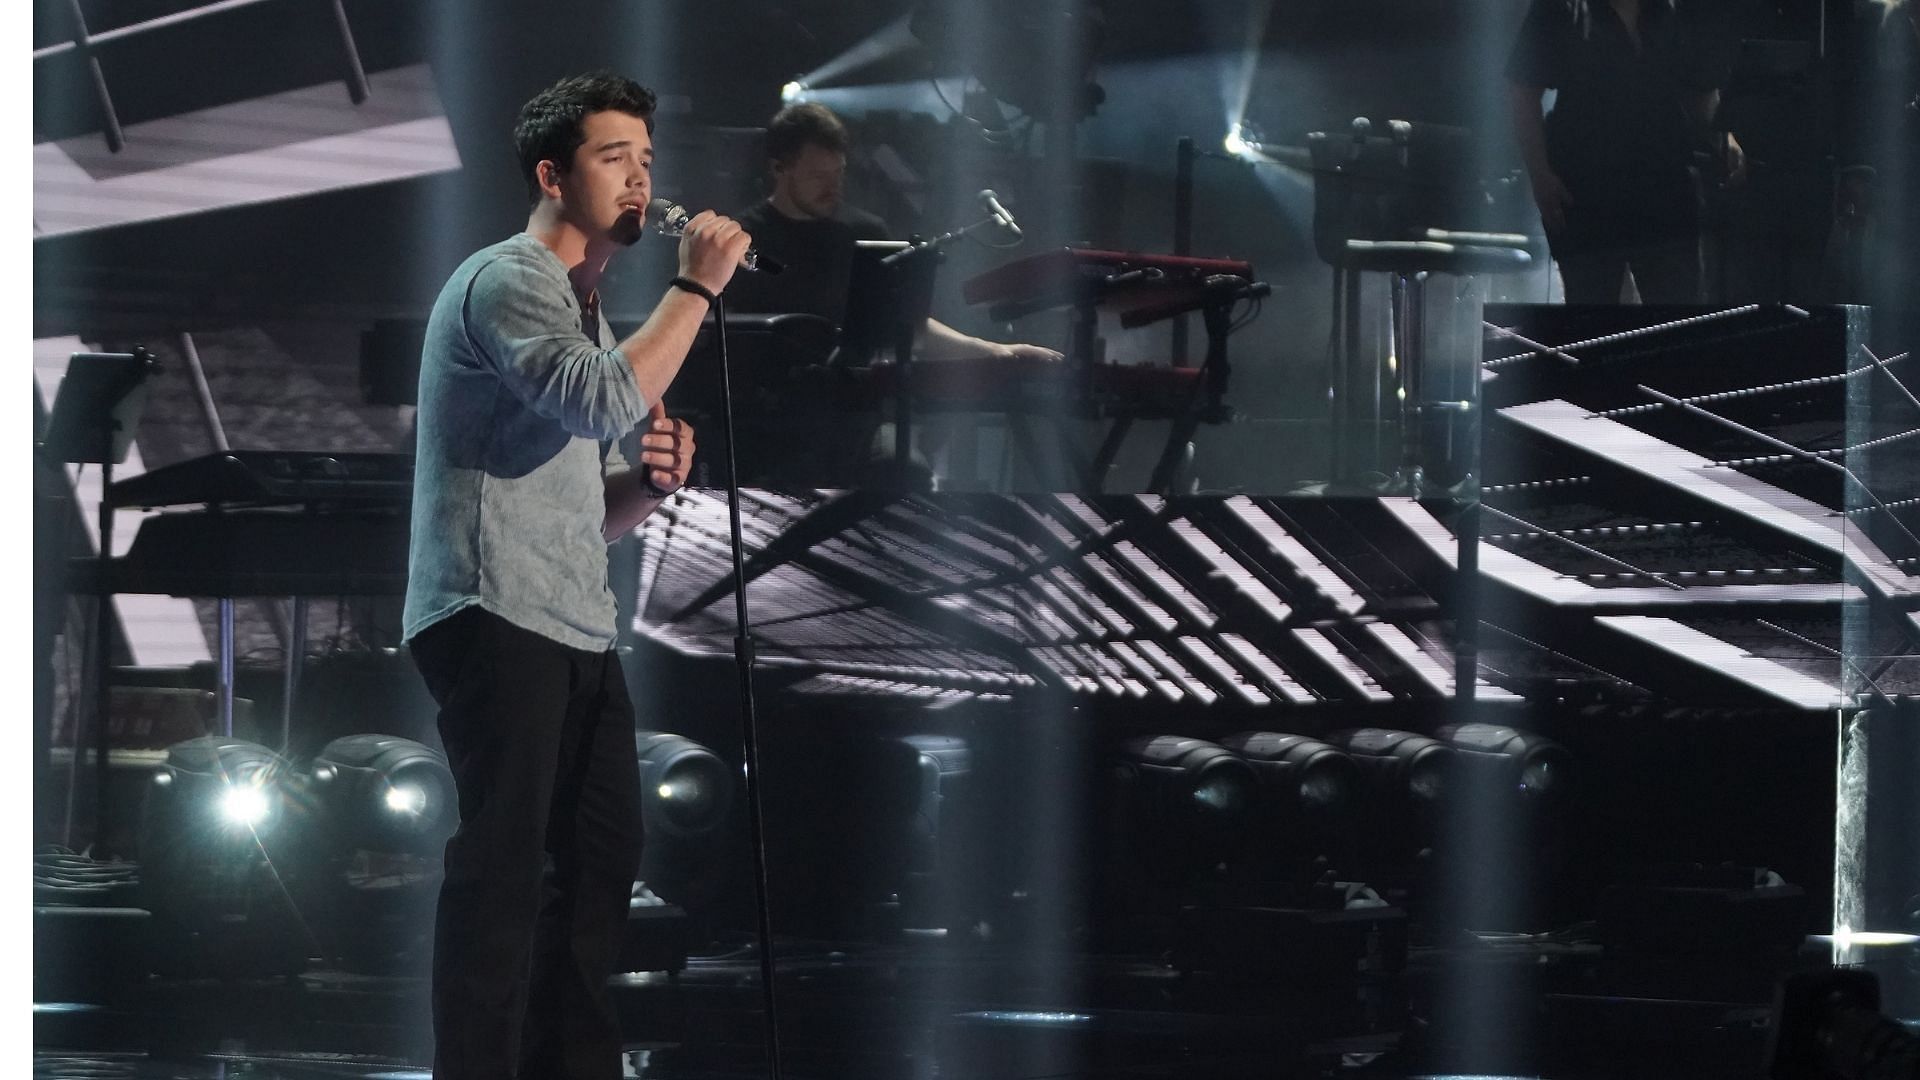 Noah Thompson fails to strike a chord with fans on American Idol (Image via Eric McCandless/ABC)